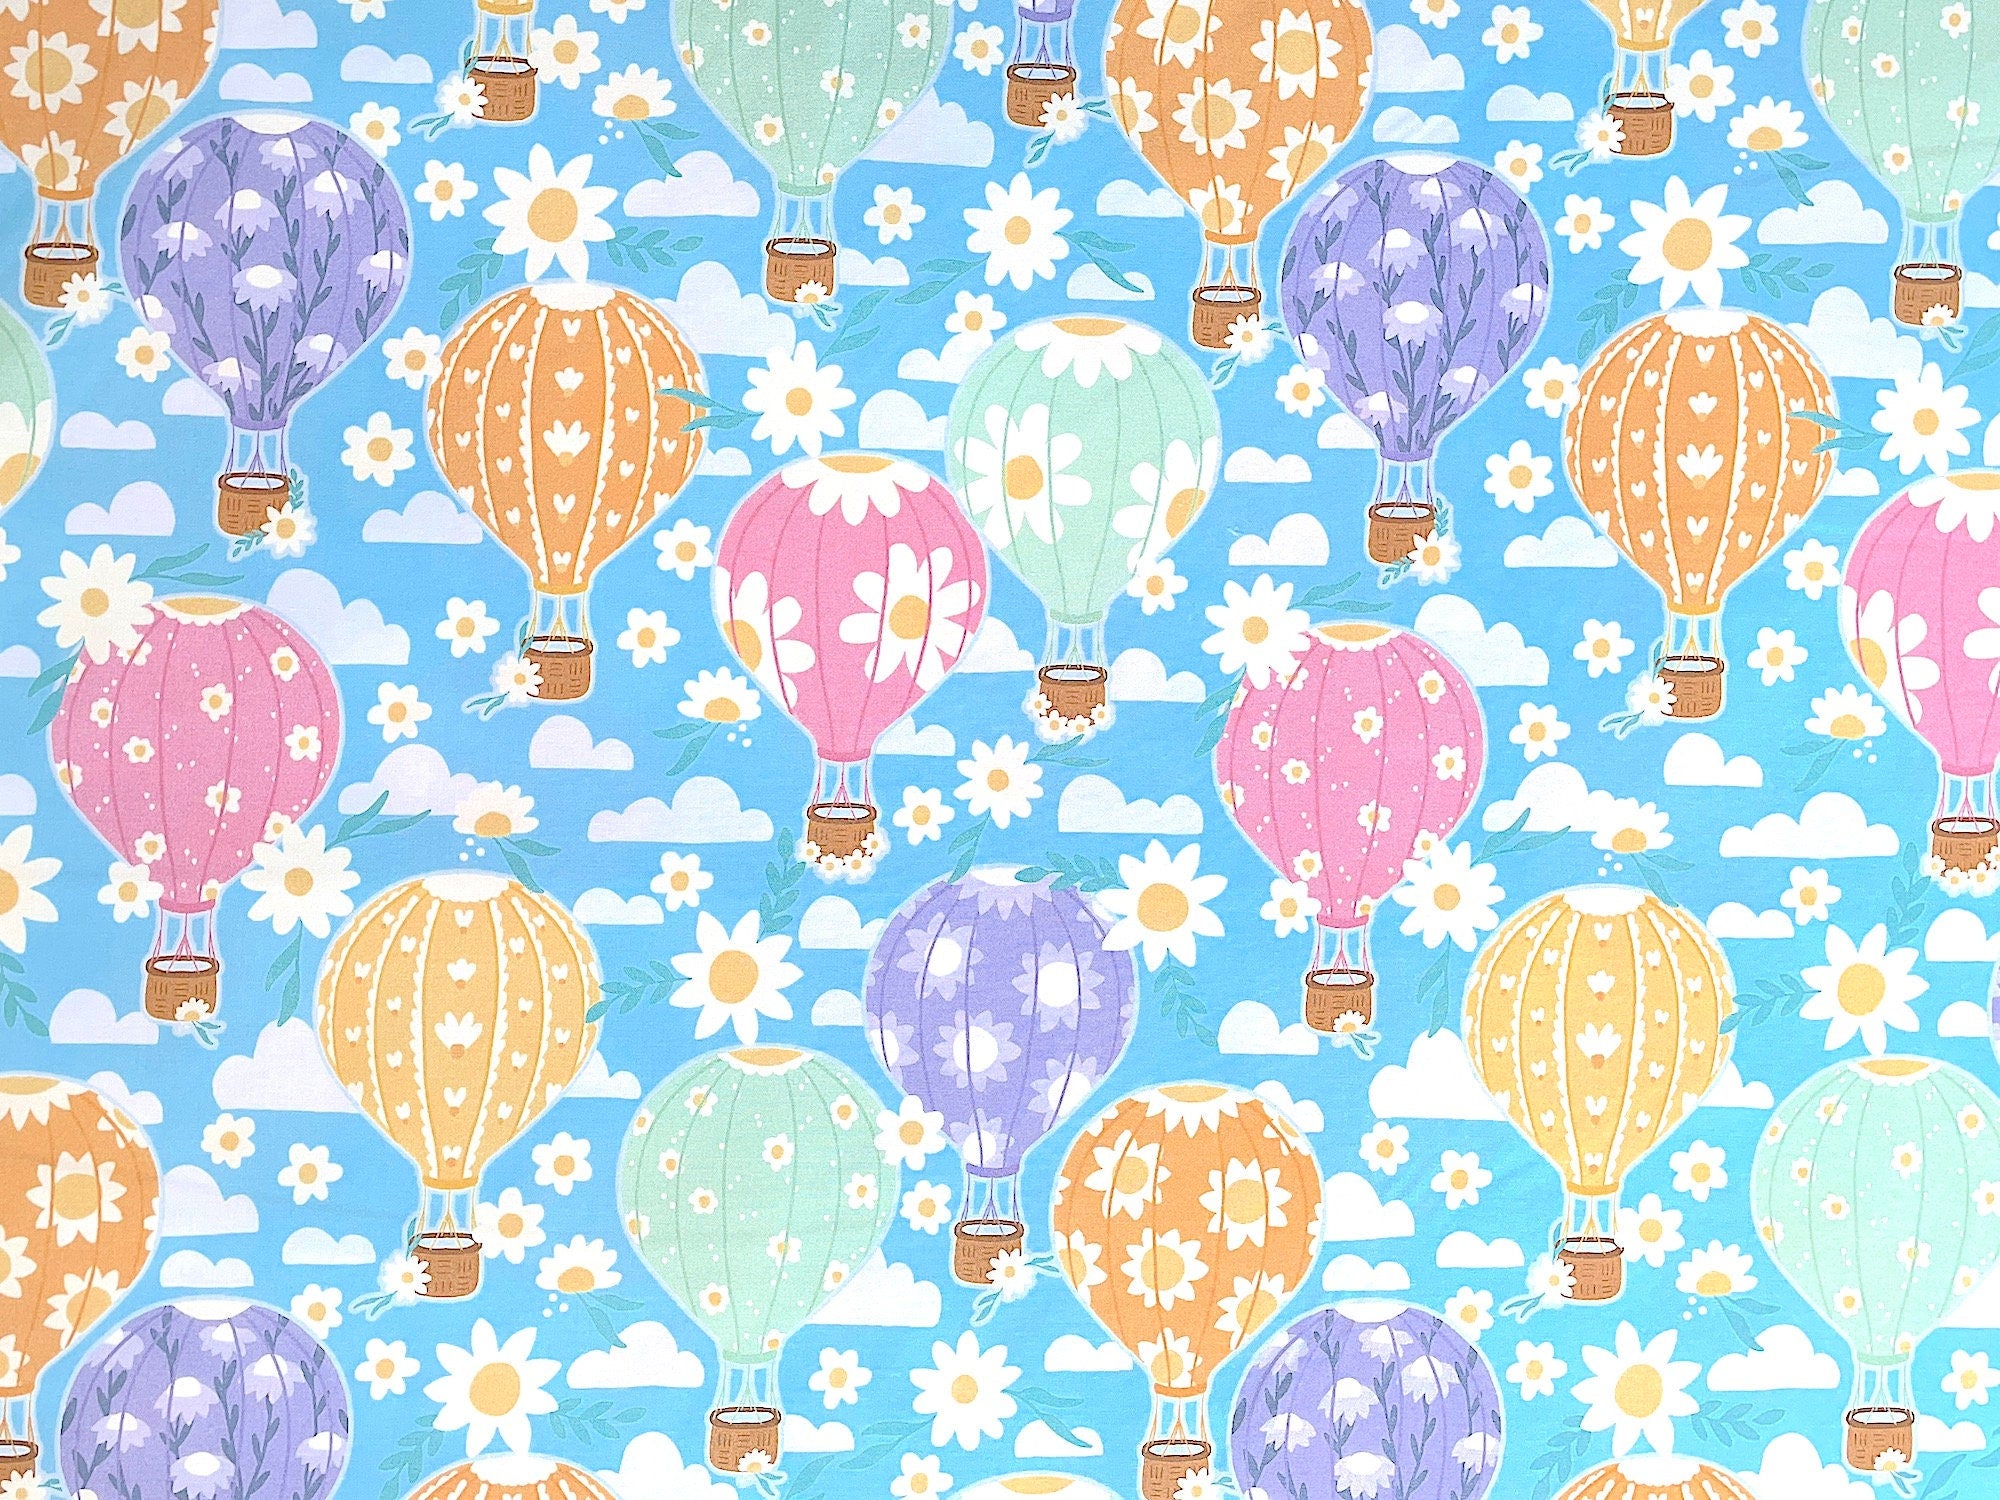 Blue cotton fabric covered with hot air balloons that are purple, pink, green.